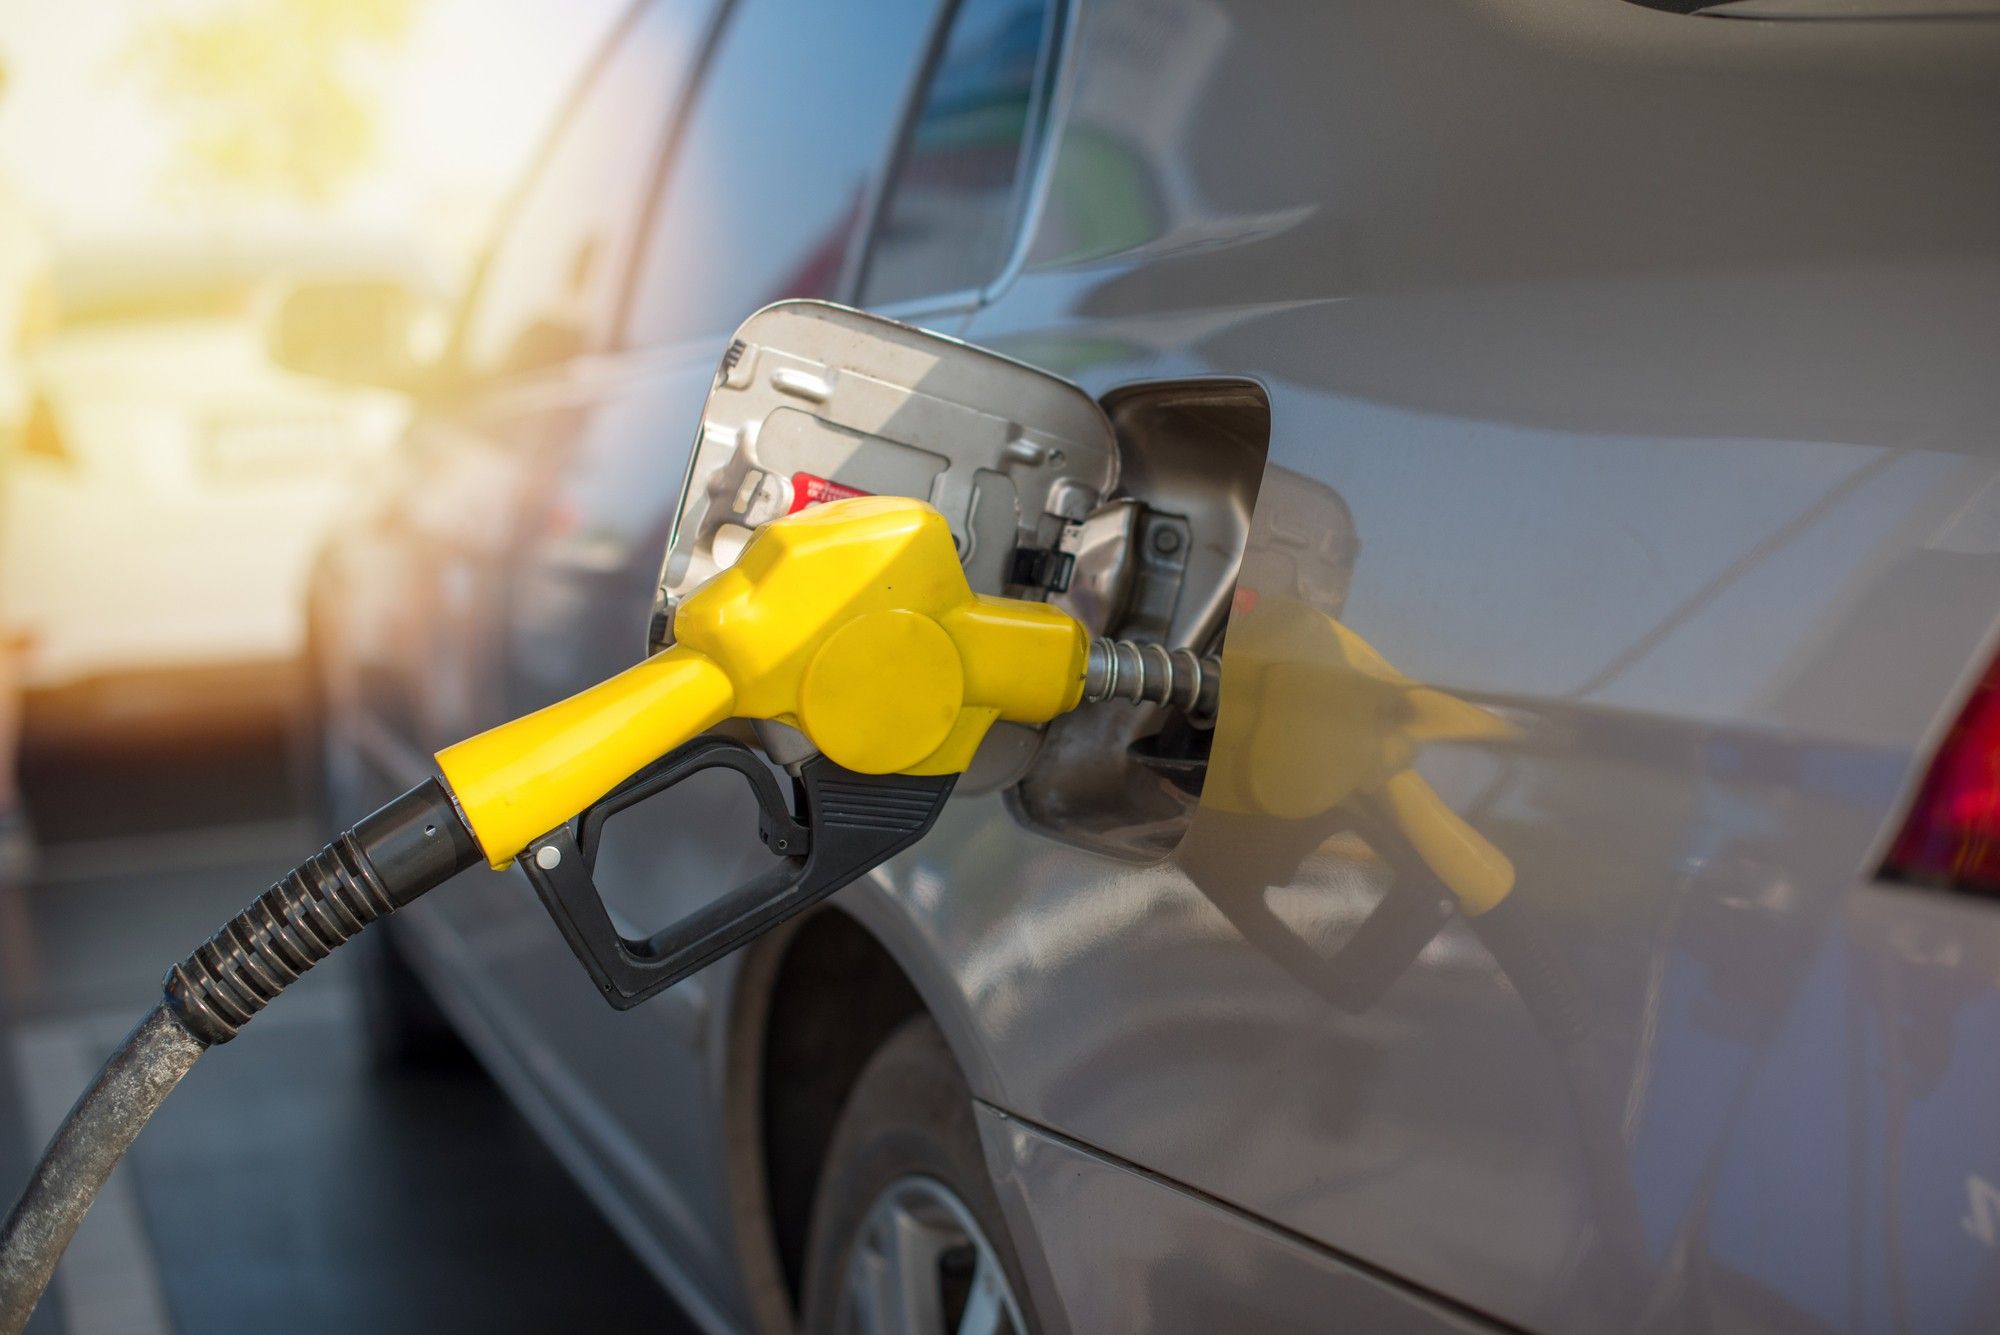 Shell Playing Game With Debit Card Gas Prices, Says Class Action